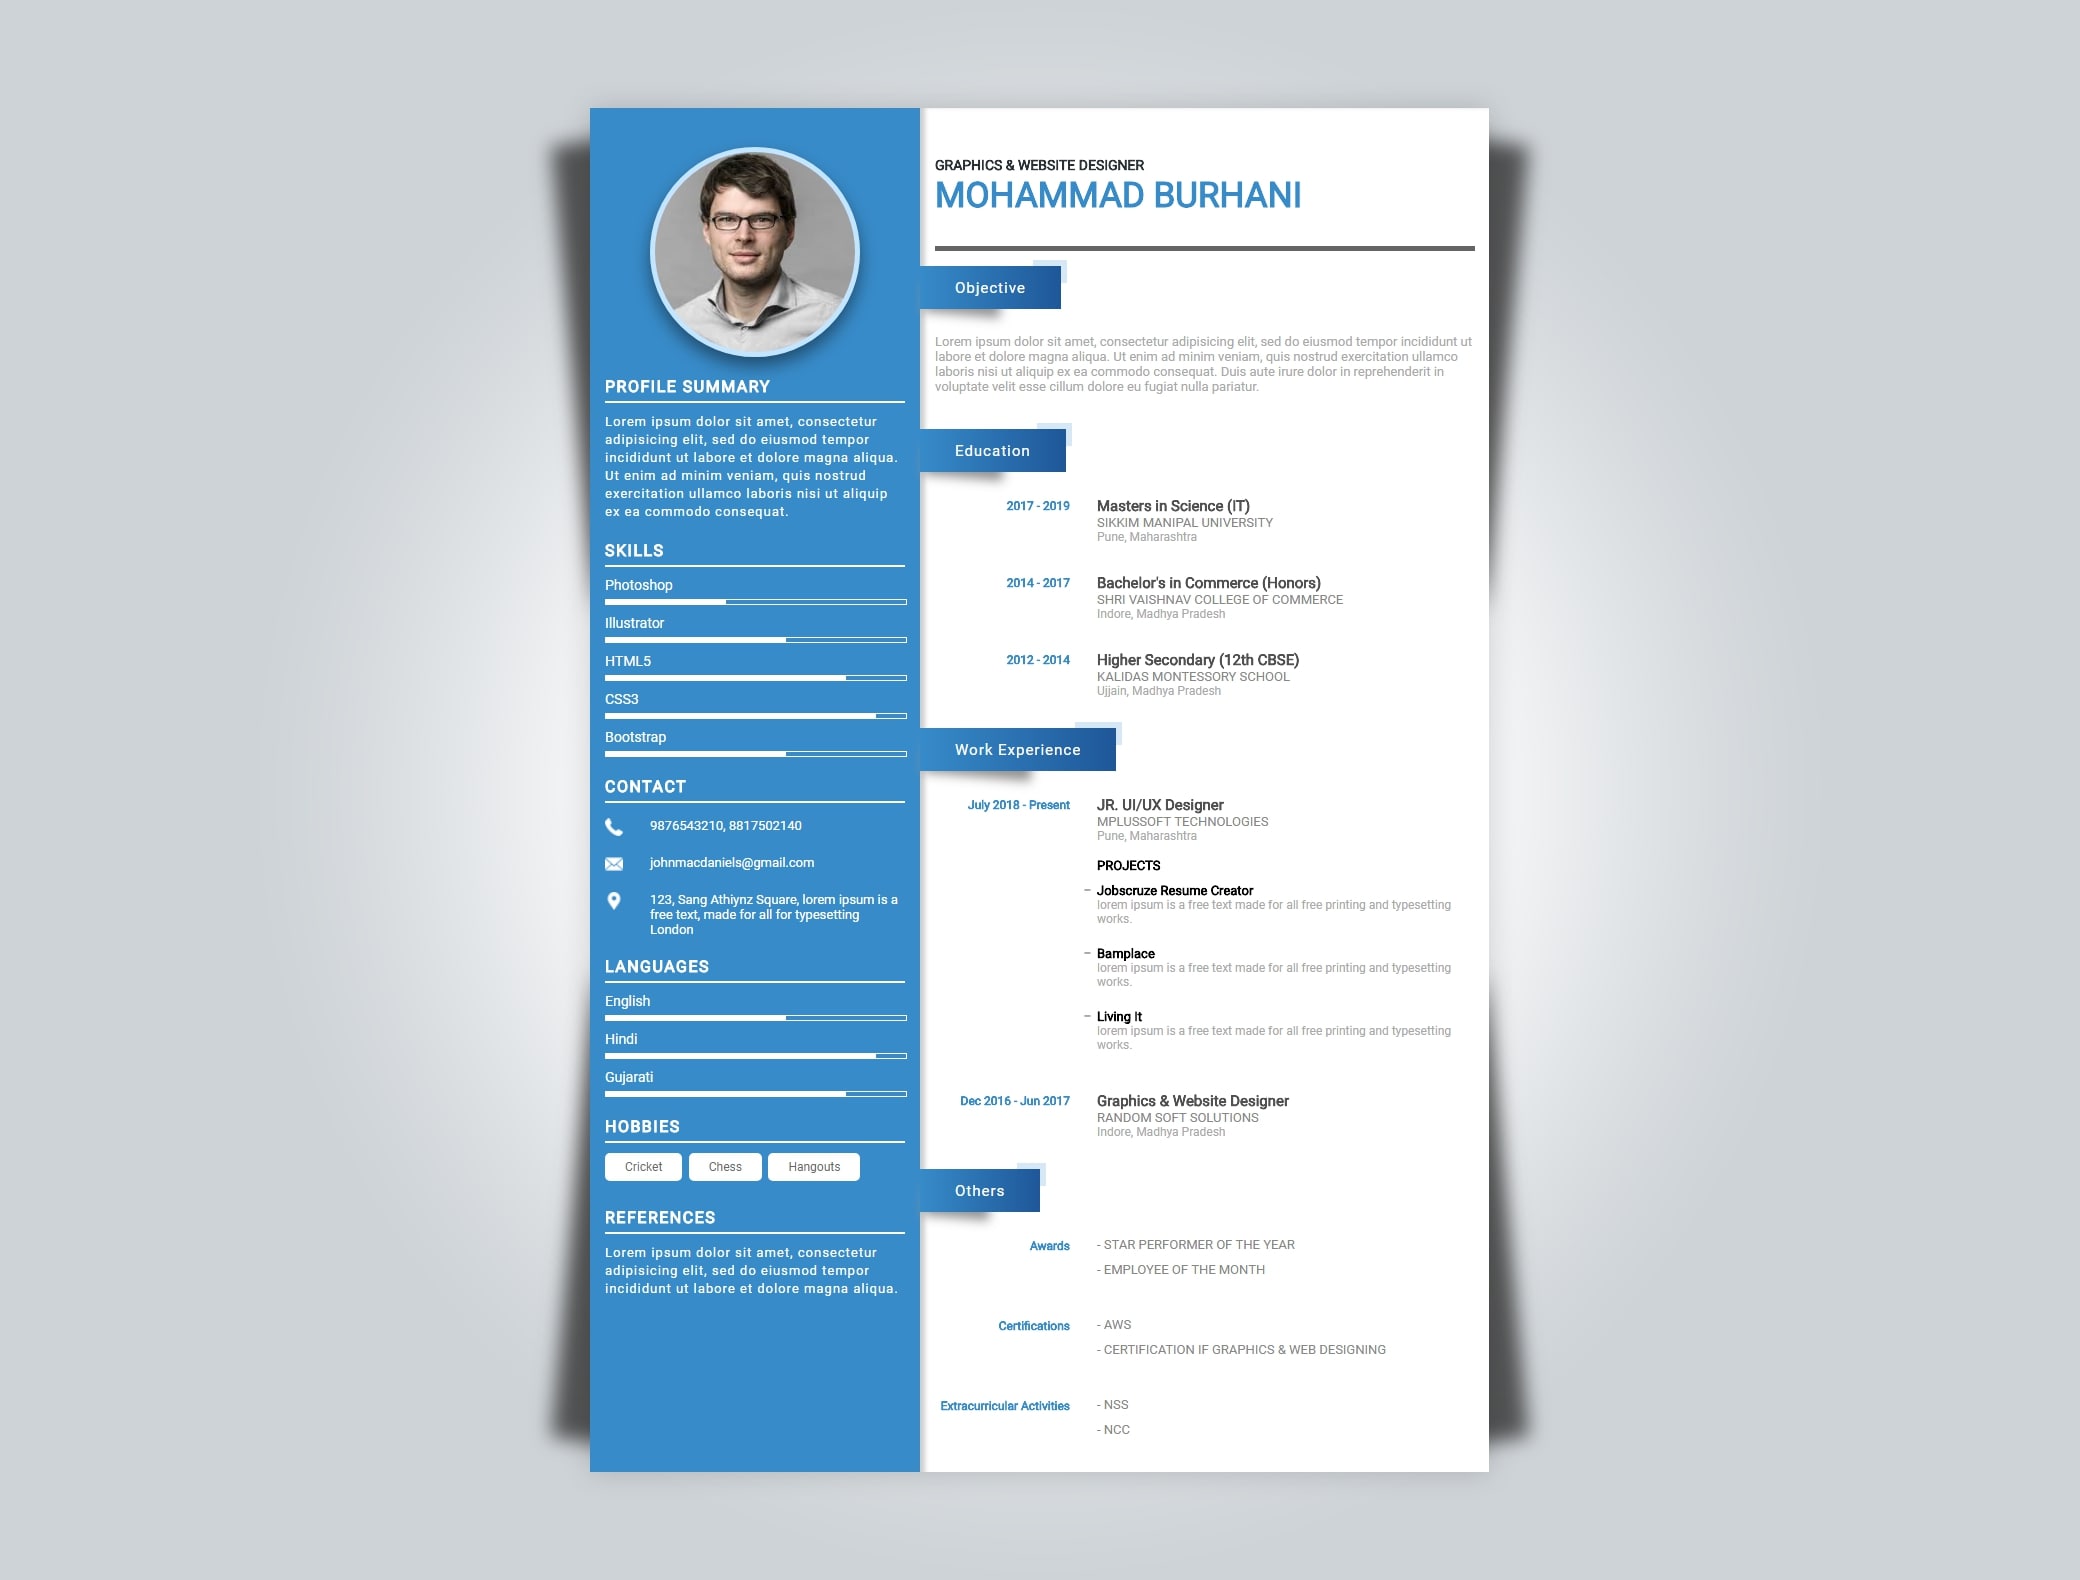 Project Manager Resume Writing Tips